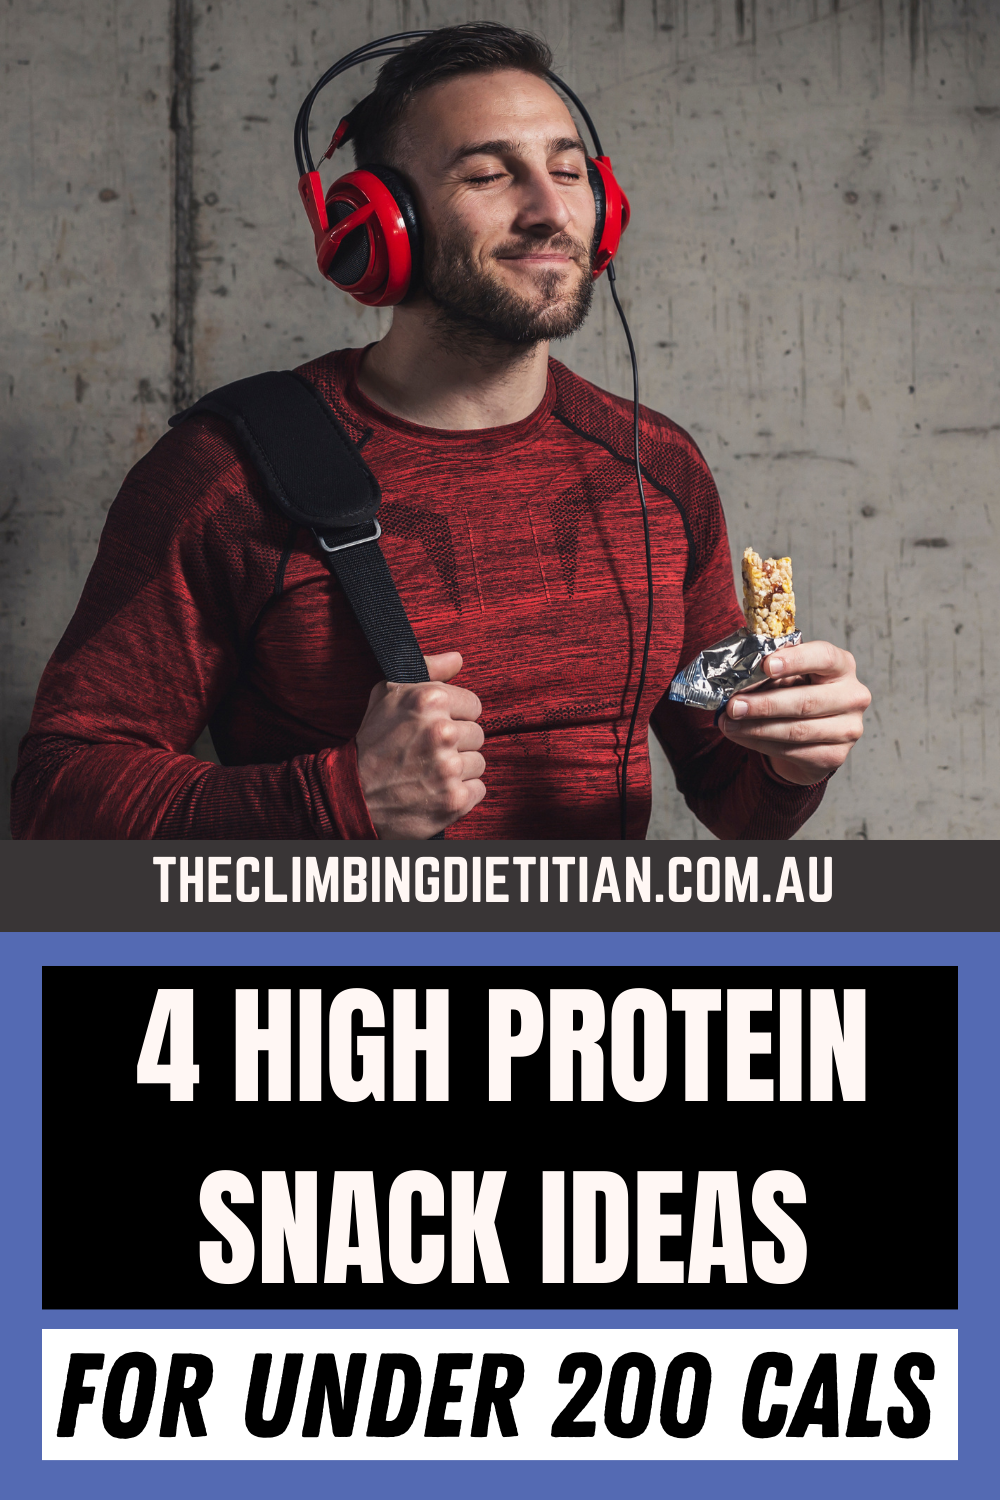 4 Dietitian Recommended High Protein Snacks (To Help You Lose Weight and Build Muscle)  20g Protein, Under 200 Calories - Brisbane Dietitian- Sports Dietitian